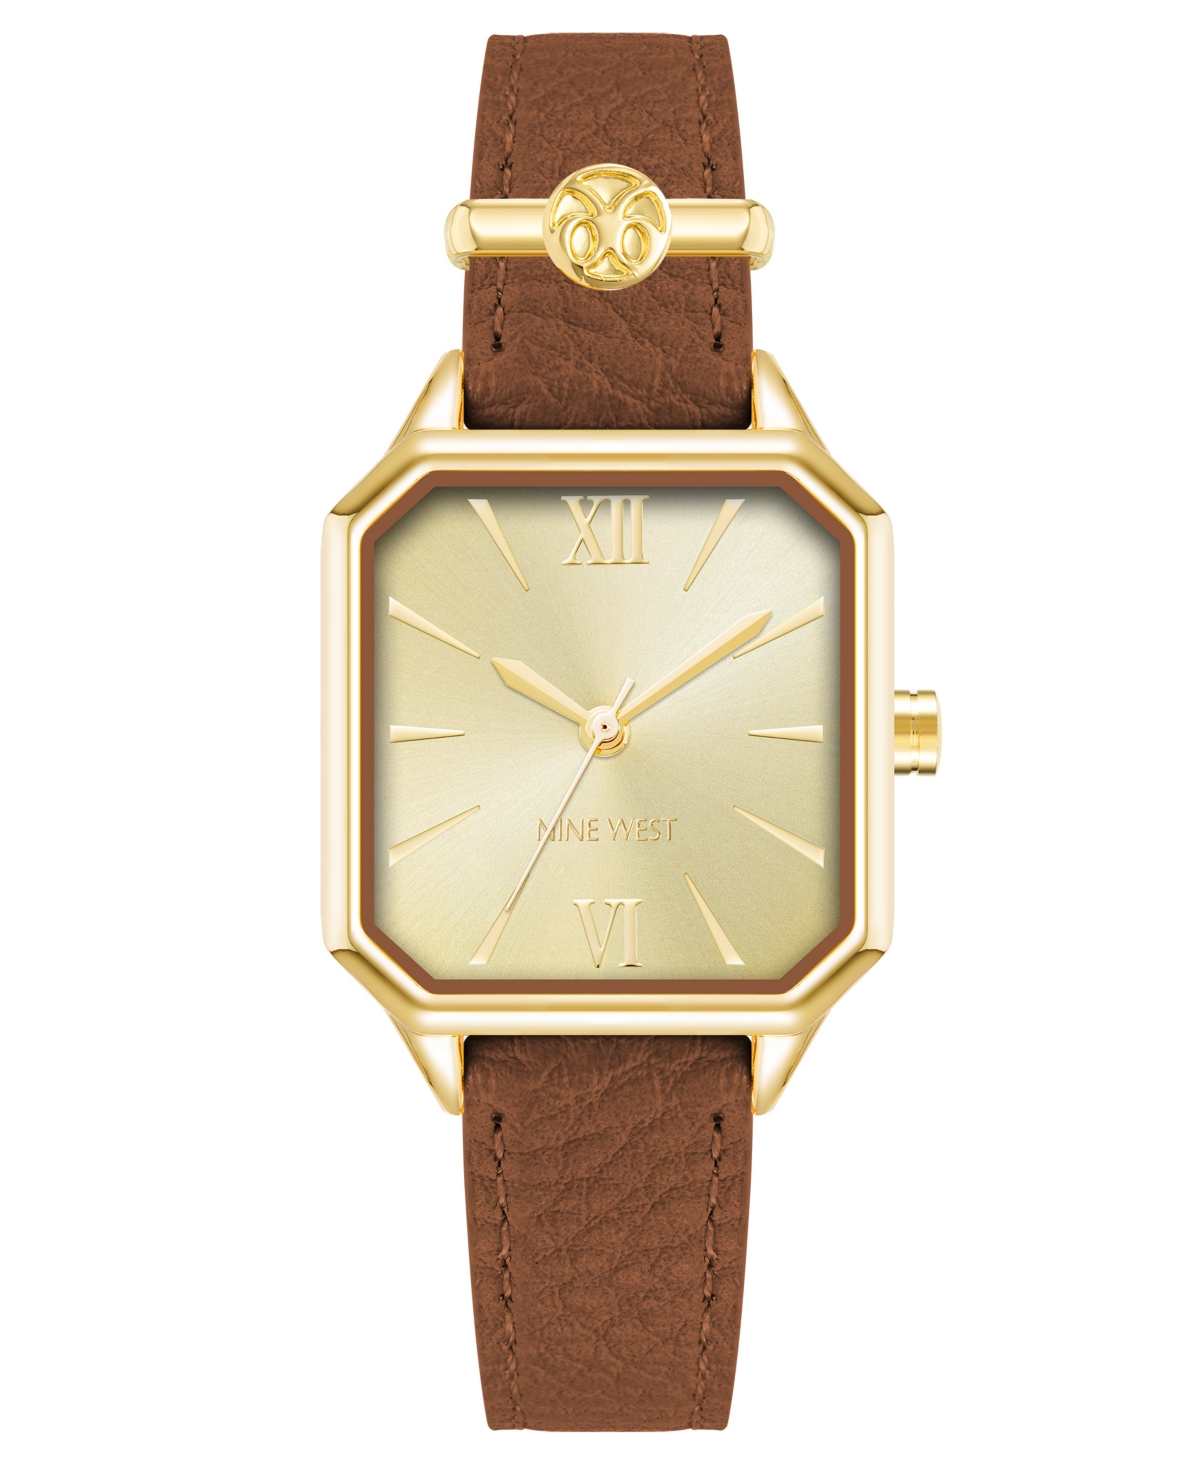 Nine West Women's Quartz Square Brown Faux Leather Band Watch, 27mm In Brown,gold-tone